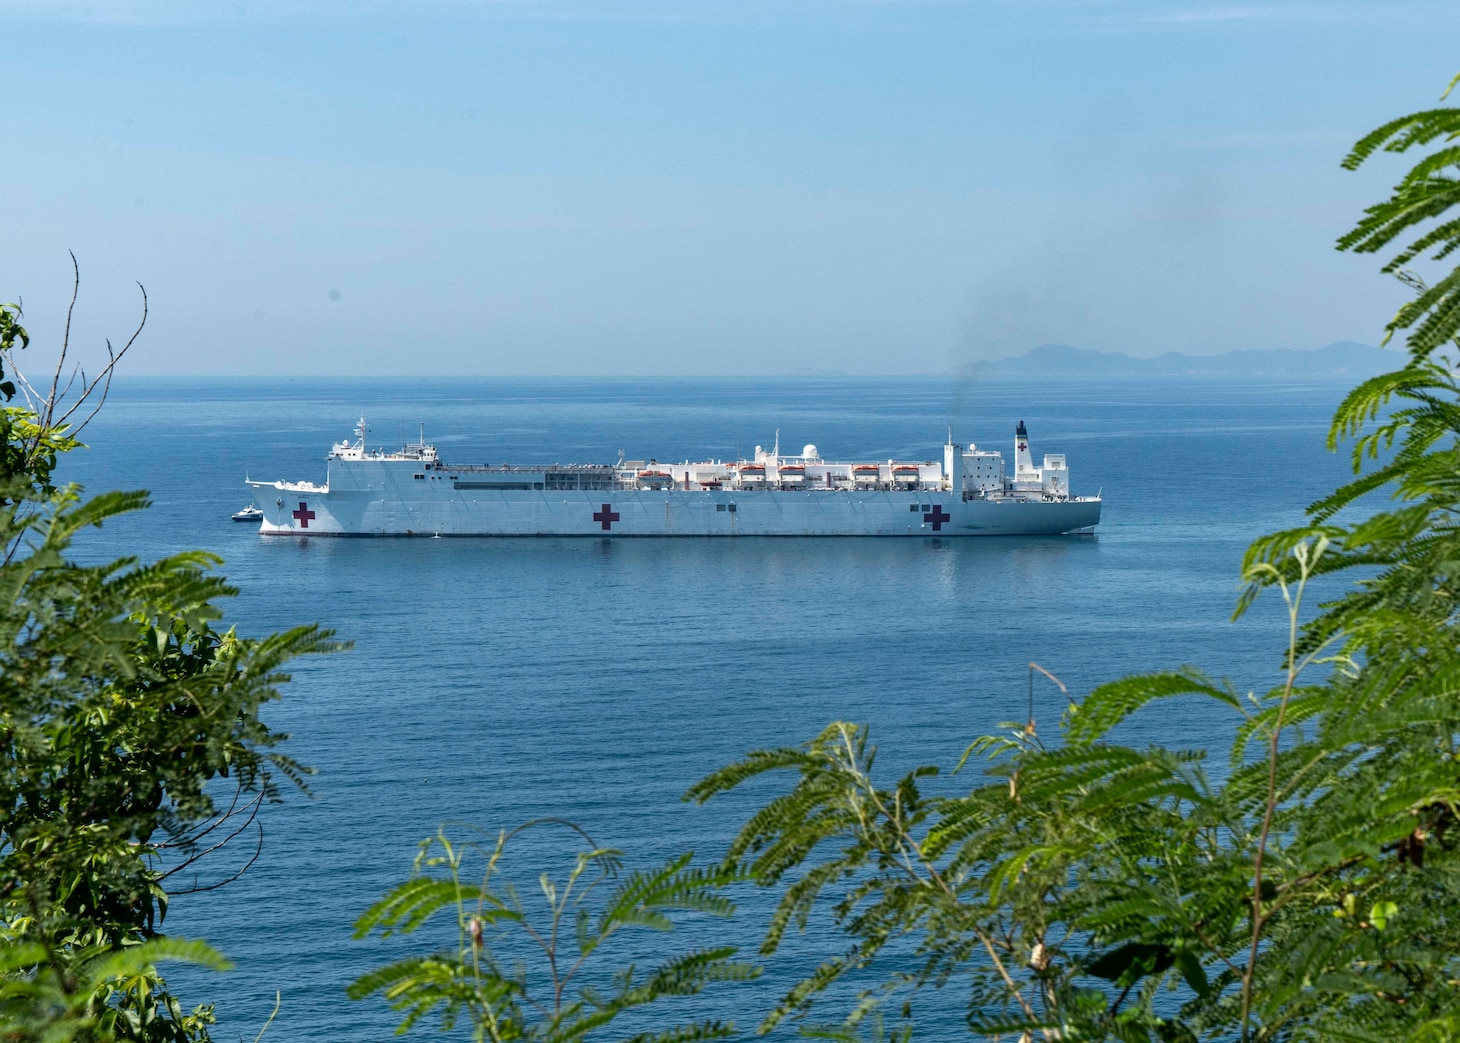 VUNG RO BAY, Vietnam (June 19, 2022) Hospital ship USNS Mercy (T-AH 19) arrives in Vung Ro Bay in the Phu Yen province of Vietnam for Pacific Partnership 2022, June 19. Now in its 17th year, Pacific Partnership is the largest annual multinational humanitarian assistance and disaster relief preparedness mission conducted in the Indo-Pacific. (U.S. Navy photo by Mass Communication Specialist 2nd Class Brandon Parker)